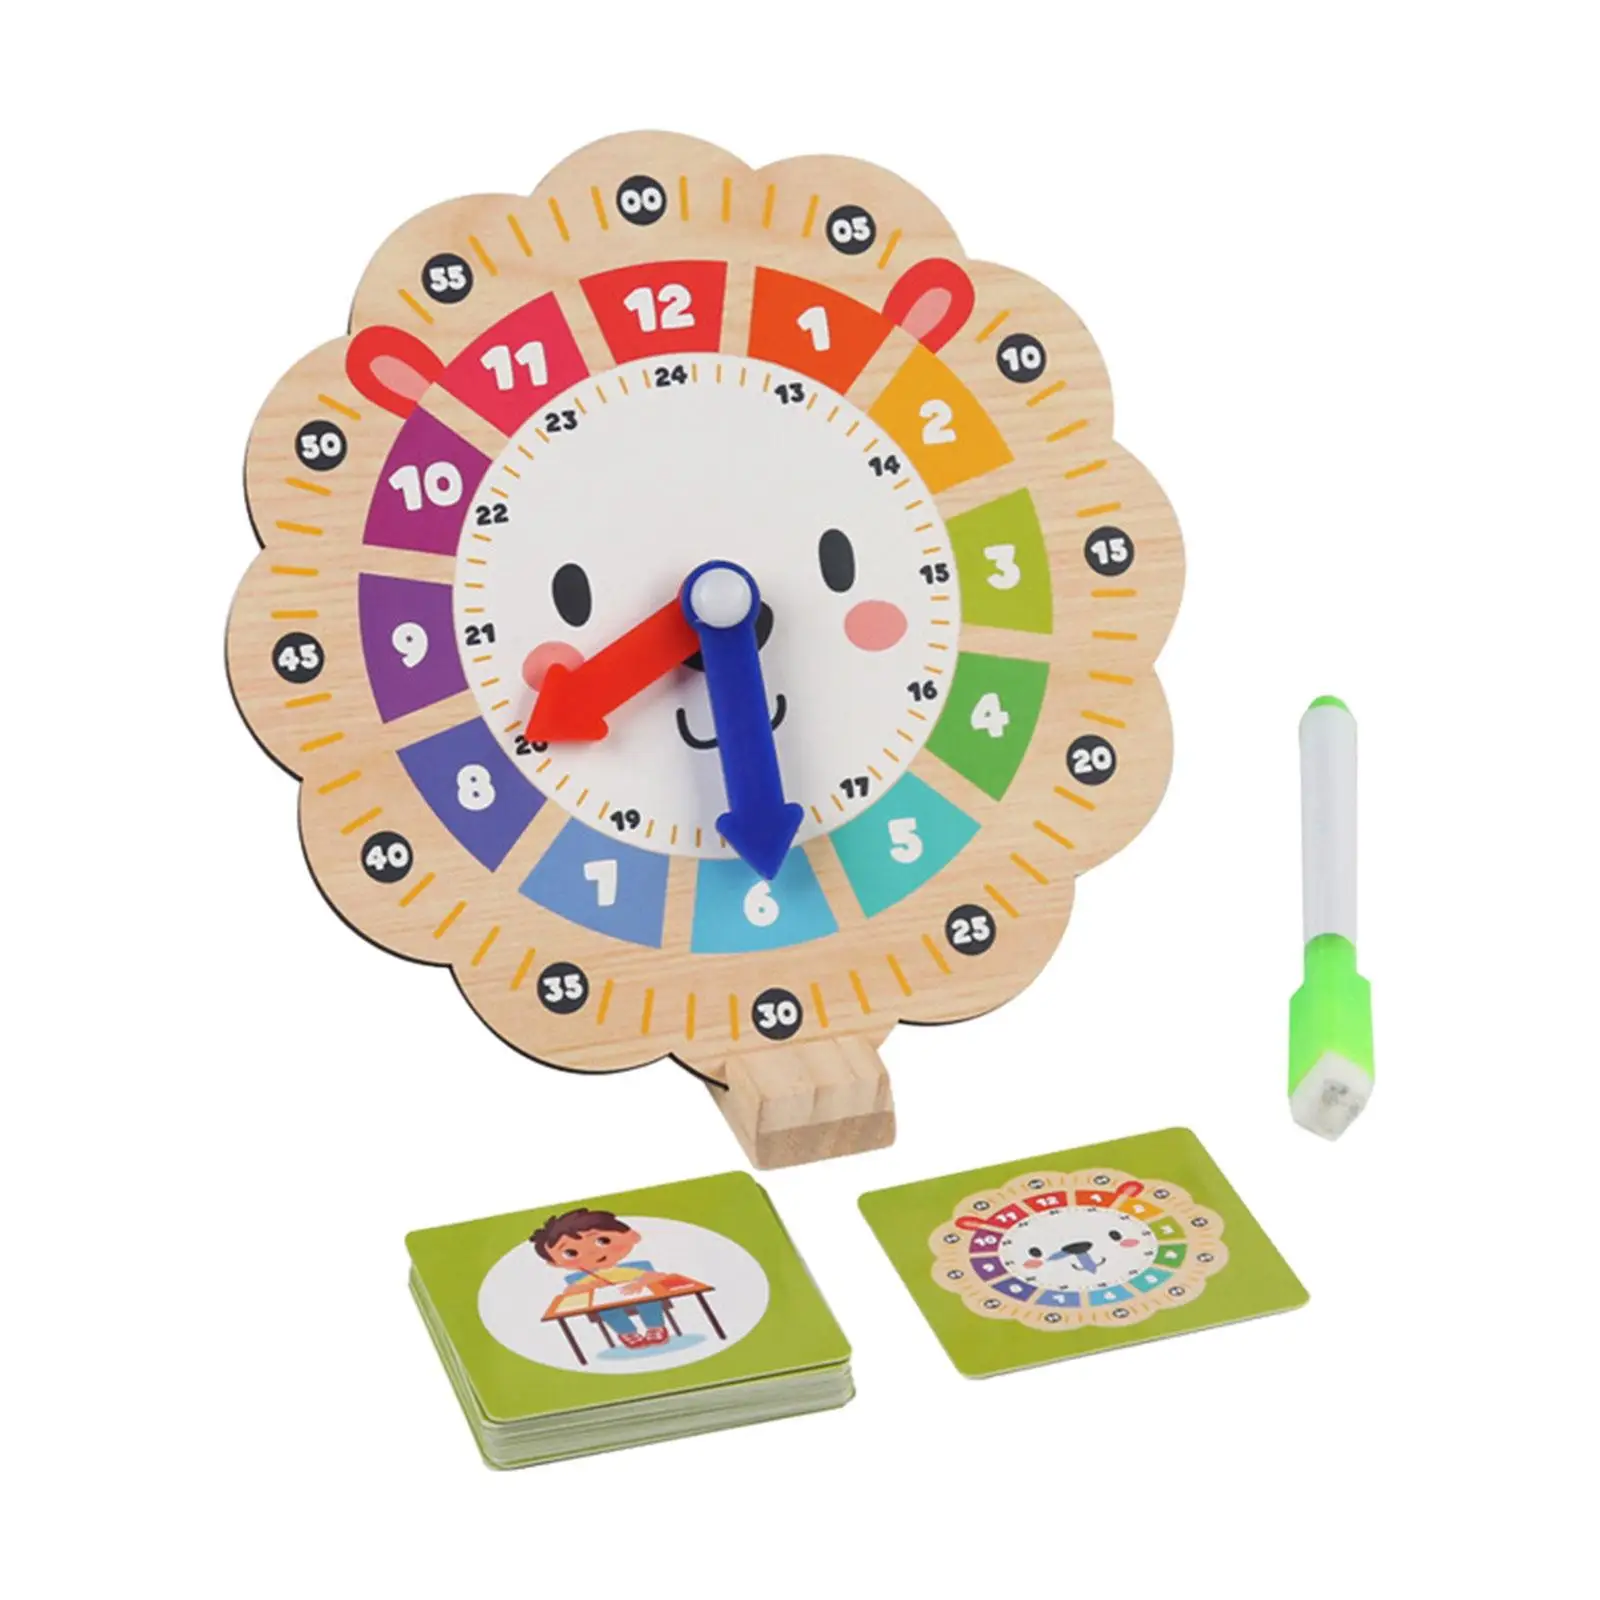 Clock Learning with 20 Cards Wooden Montessori Toy Teaching Clock for Playroom Homeschool Supplies Gifts Boys Girls 3 Year Old